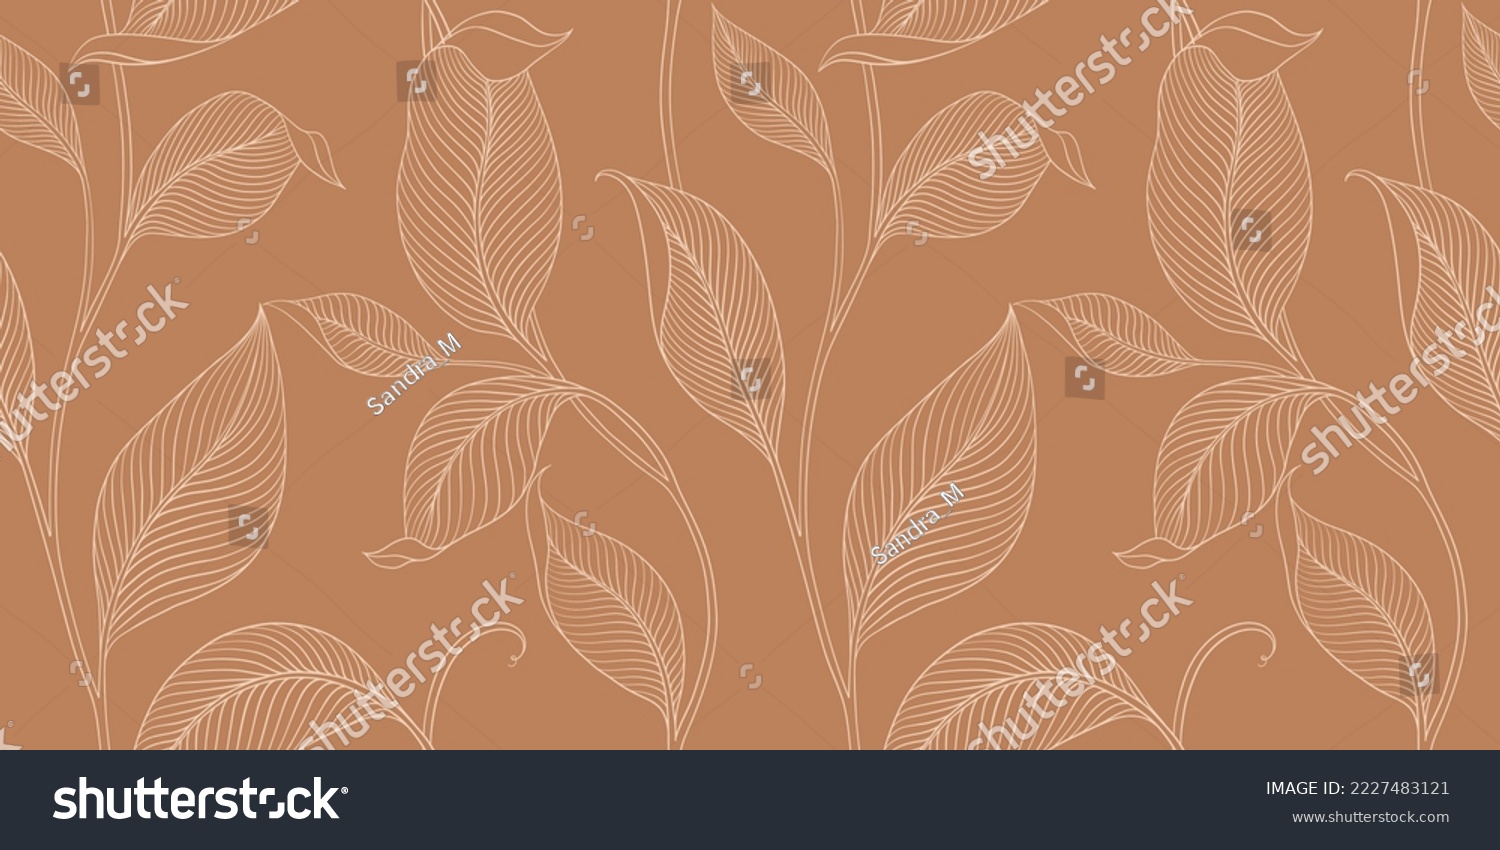 SVG of Luxury seamless pattern with striped leaves. Elegant floral background in minimalistic linear style. Trendy line art design element. Vector illustration. svg